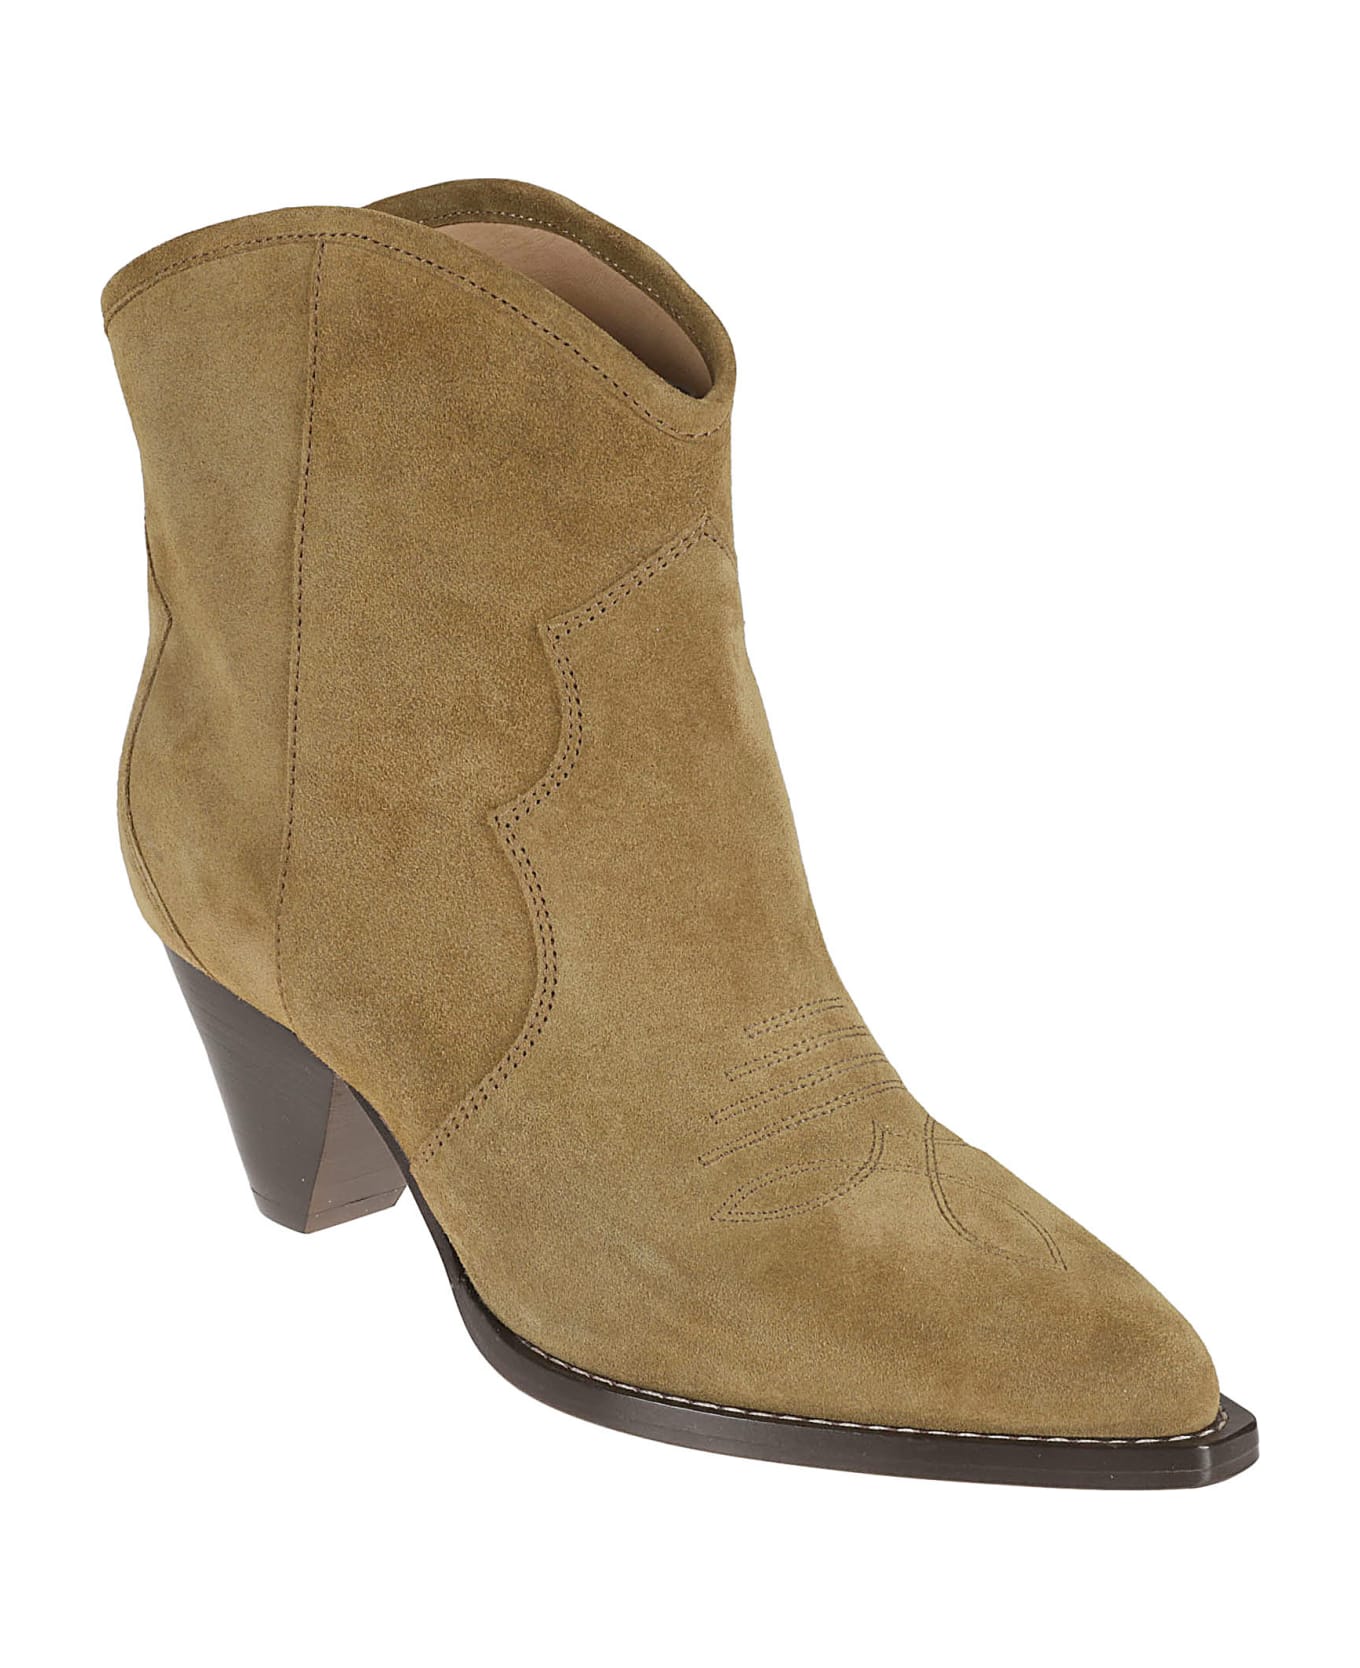 Isabel Marant Darizo Suede Ankle Boots - TAUPE ブーツ